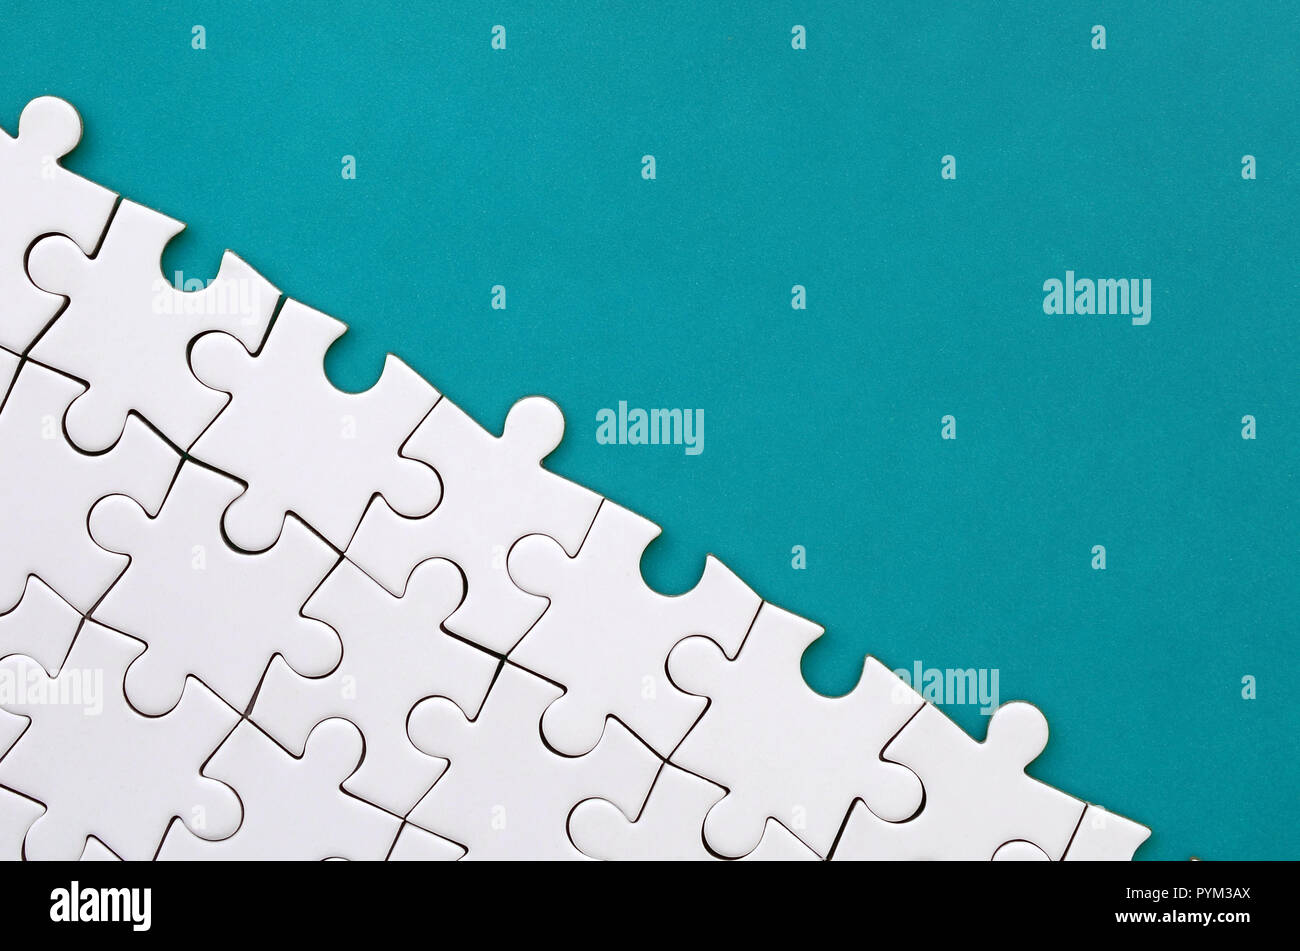 https://c8.alamy.com/comp/PYM3AX/fragment-of-a-folded-white-jigsaw-puzzle-on-the-background-of-a-blue-plastic-surface-texture-photo-with-copy-space-for-text-PYM3AX.jpg